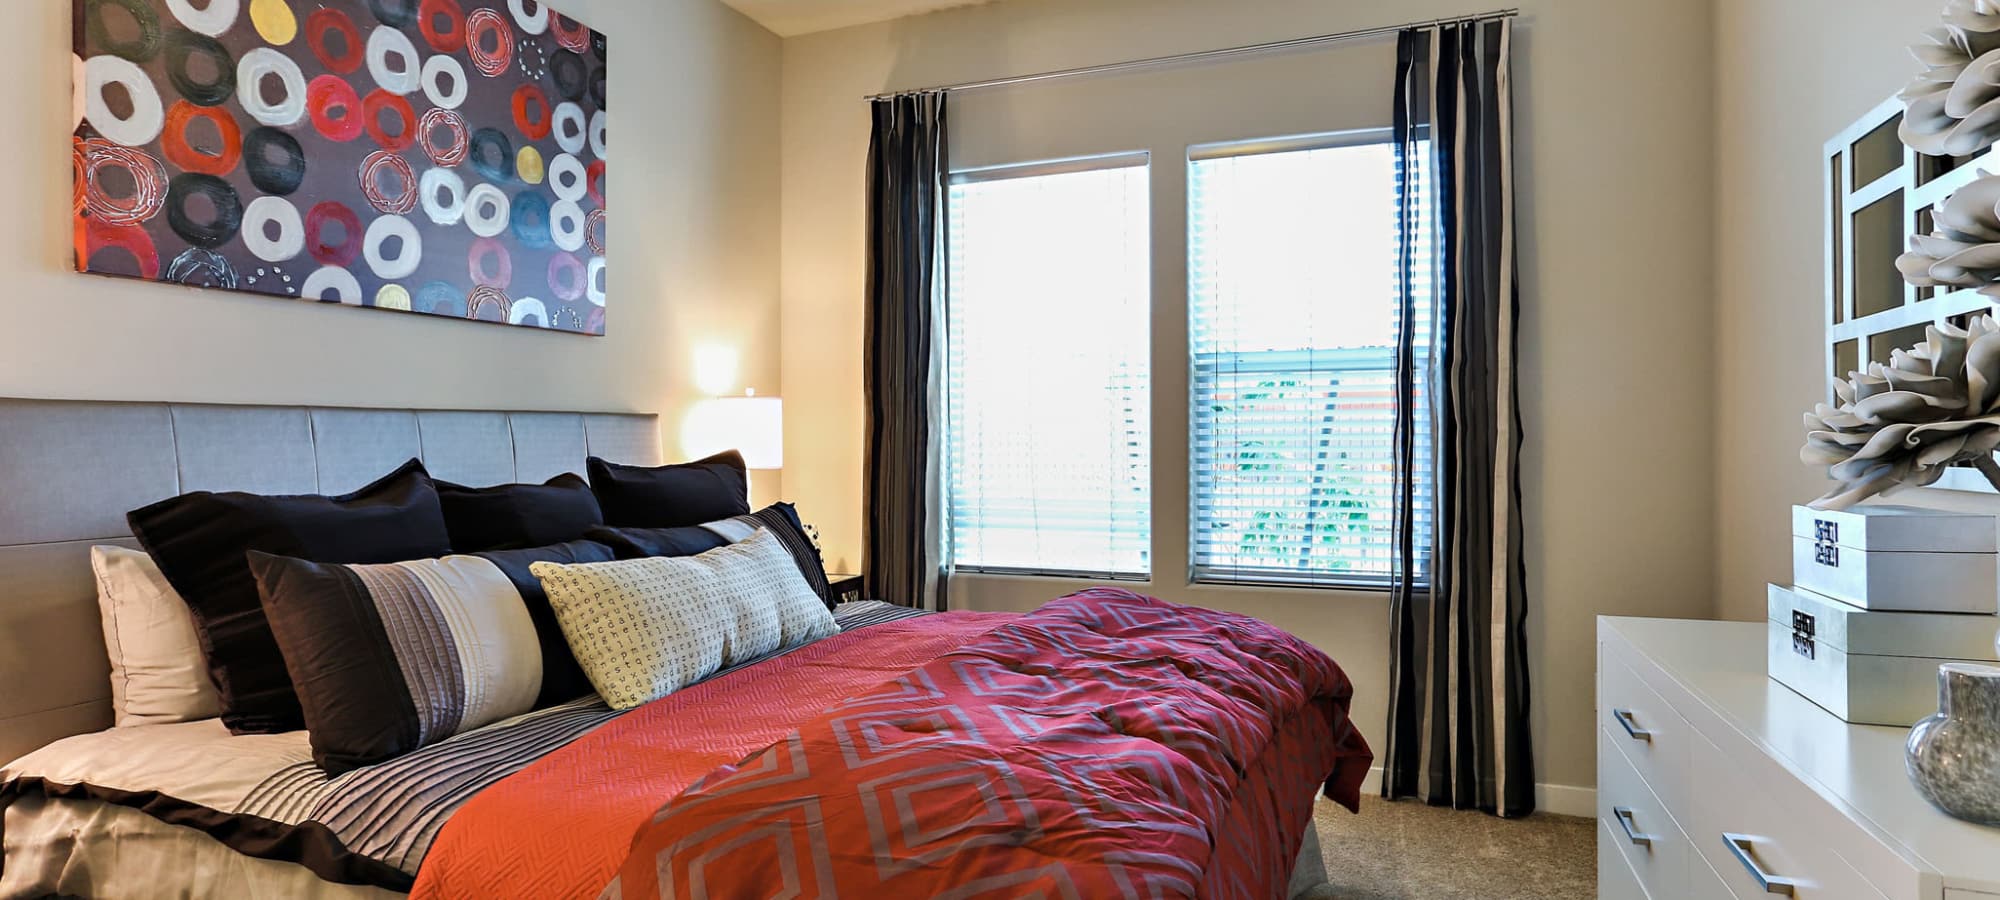 Well-decorated bedroom in model home at The Hyve in Tempe, Arizona